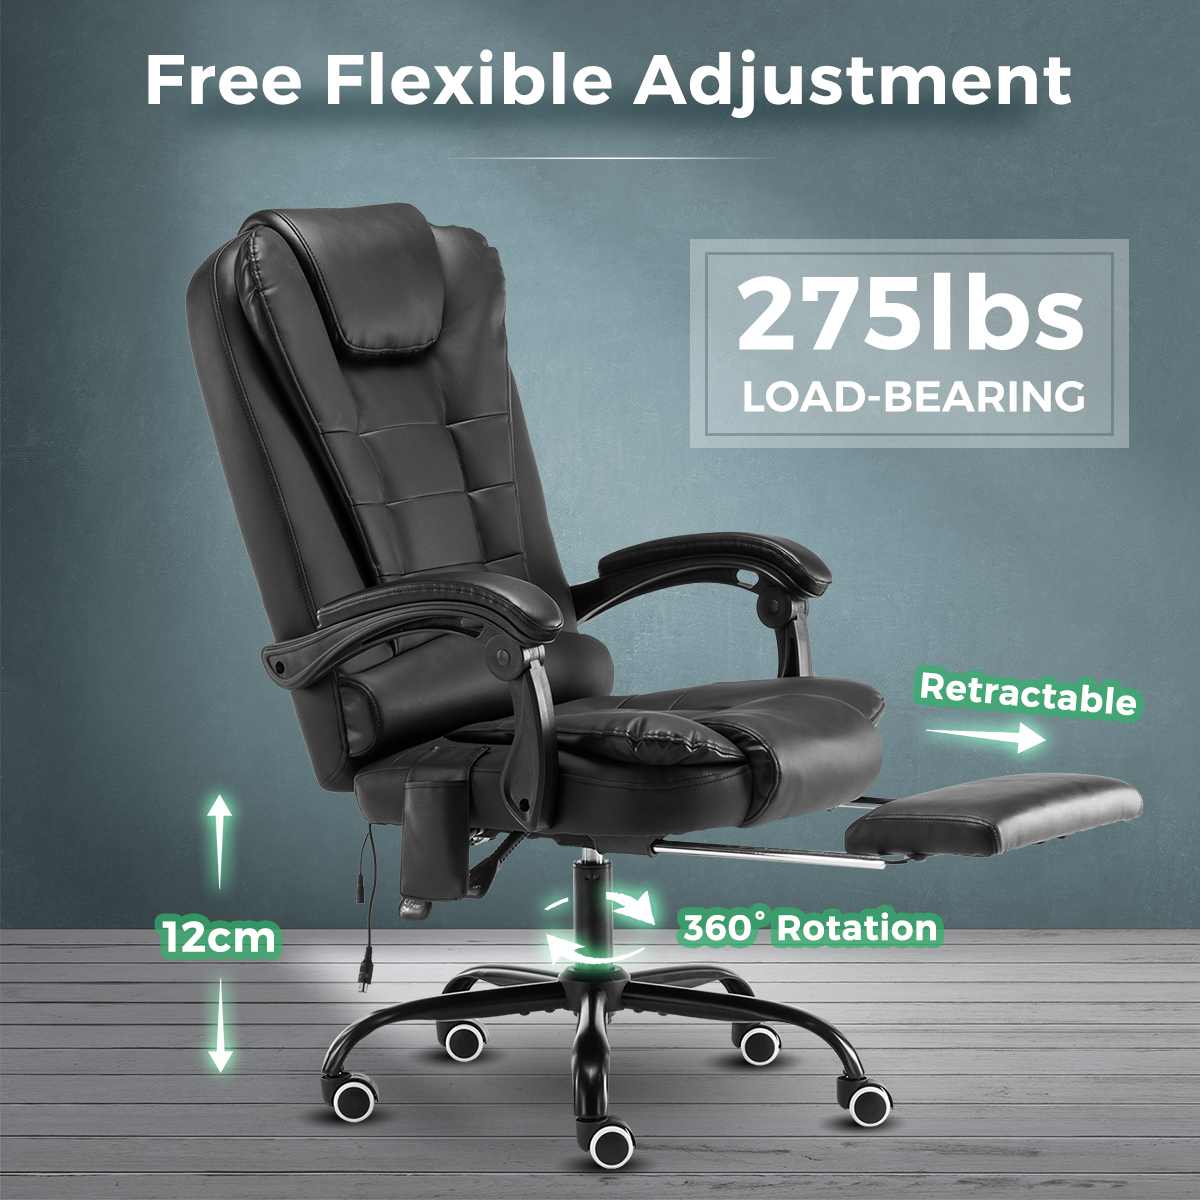 7 Point Massage Boss Chair Computer Office Chair Home Swivel Massage Chair Lifting Adjustable Chair 0.8mm PVC with Footrest